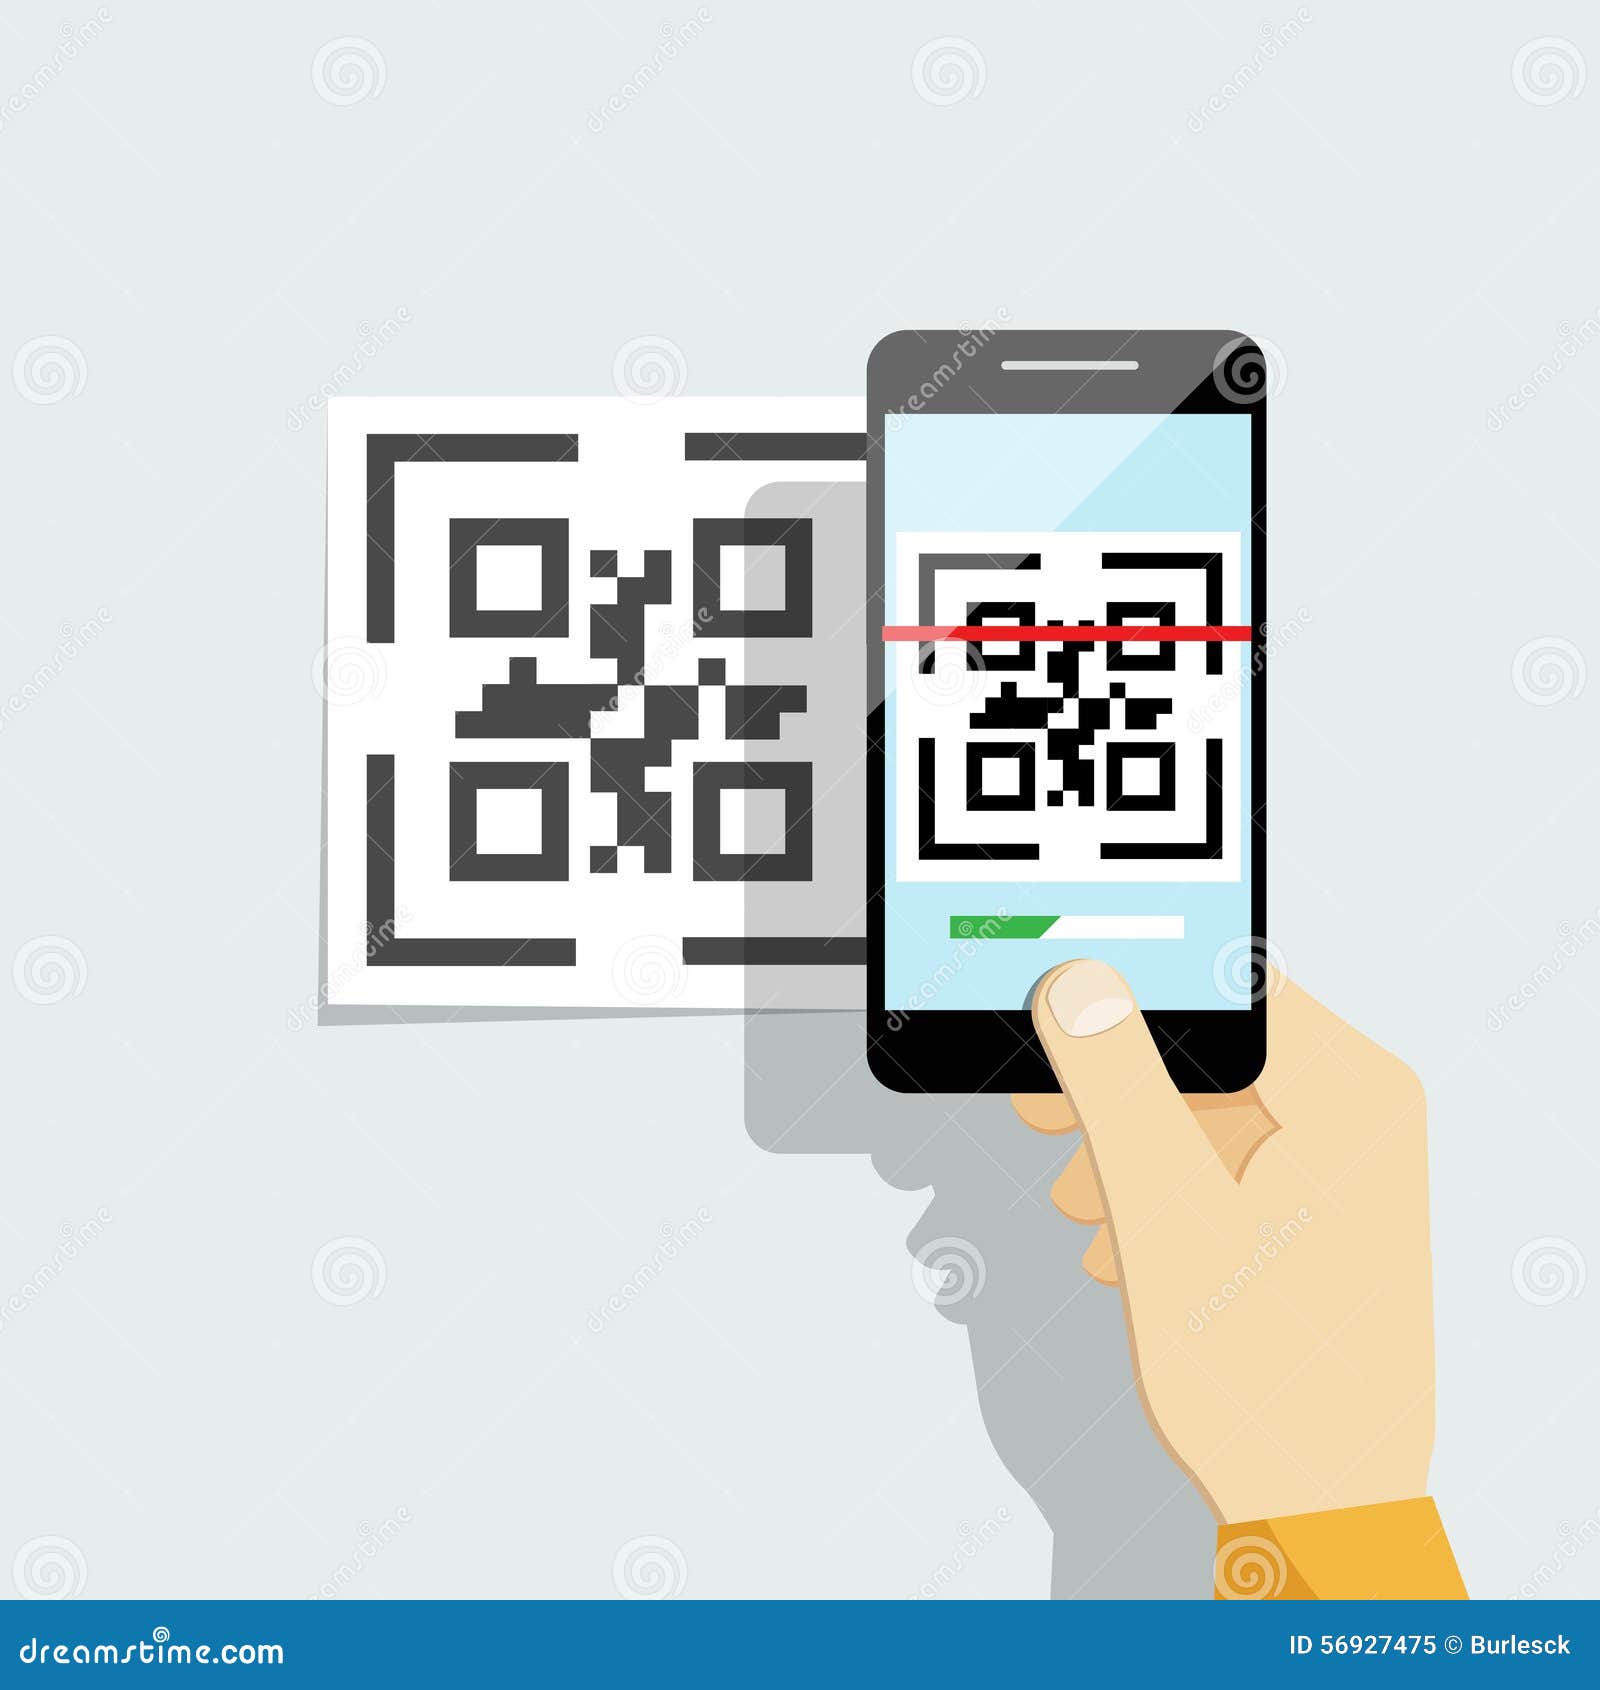 capture qr code on mobile phone